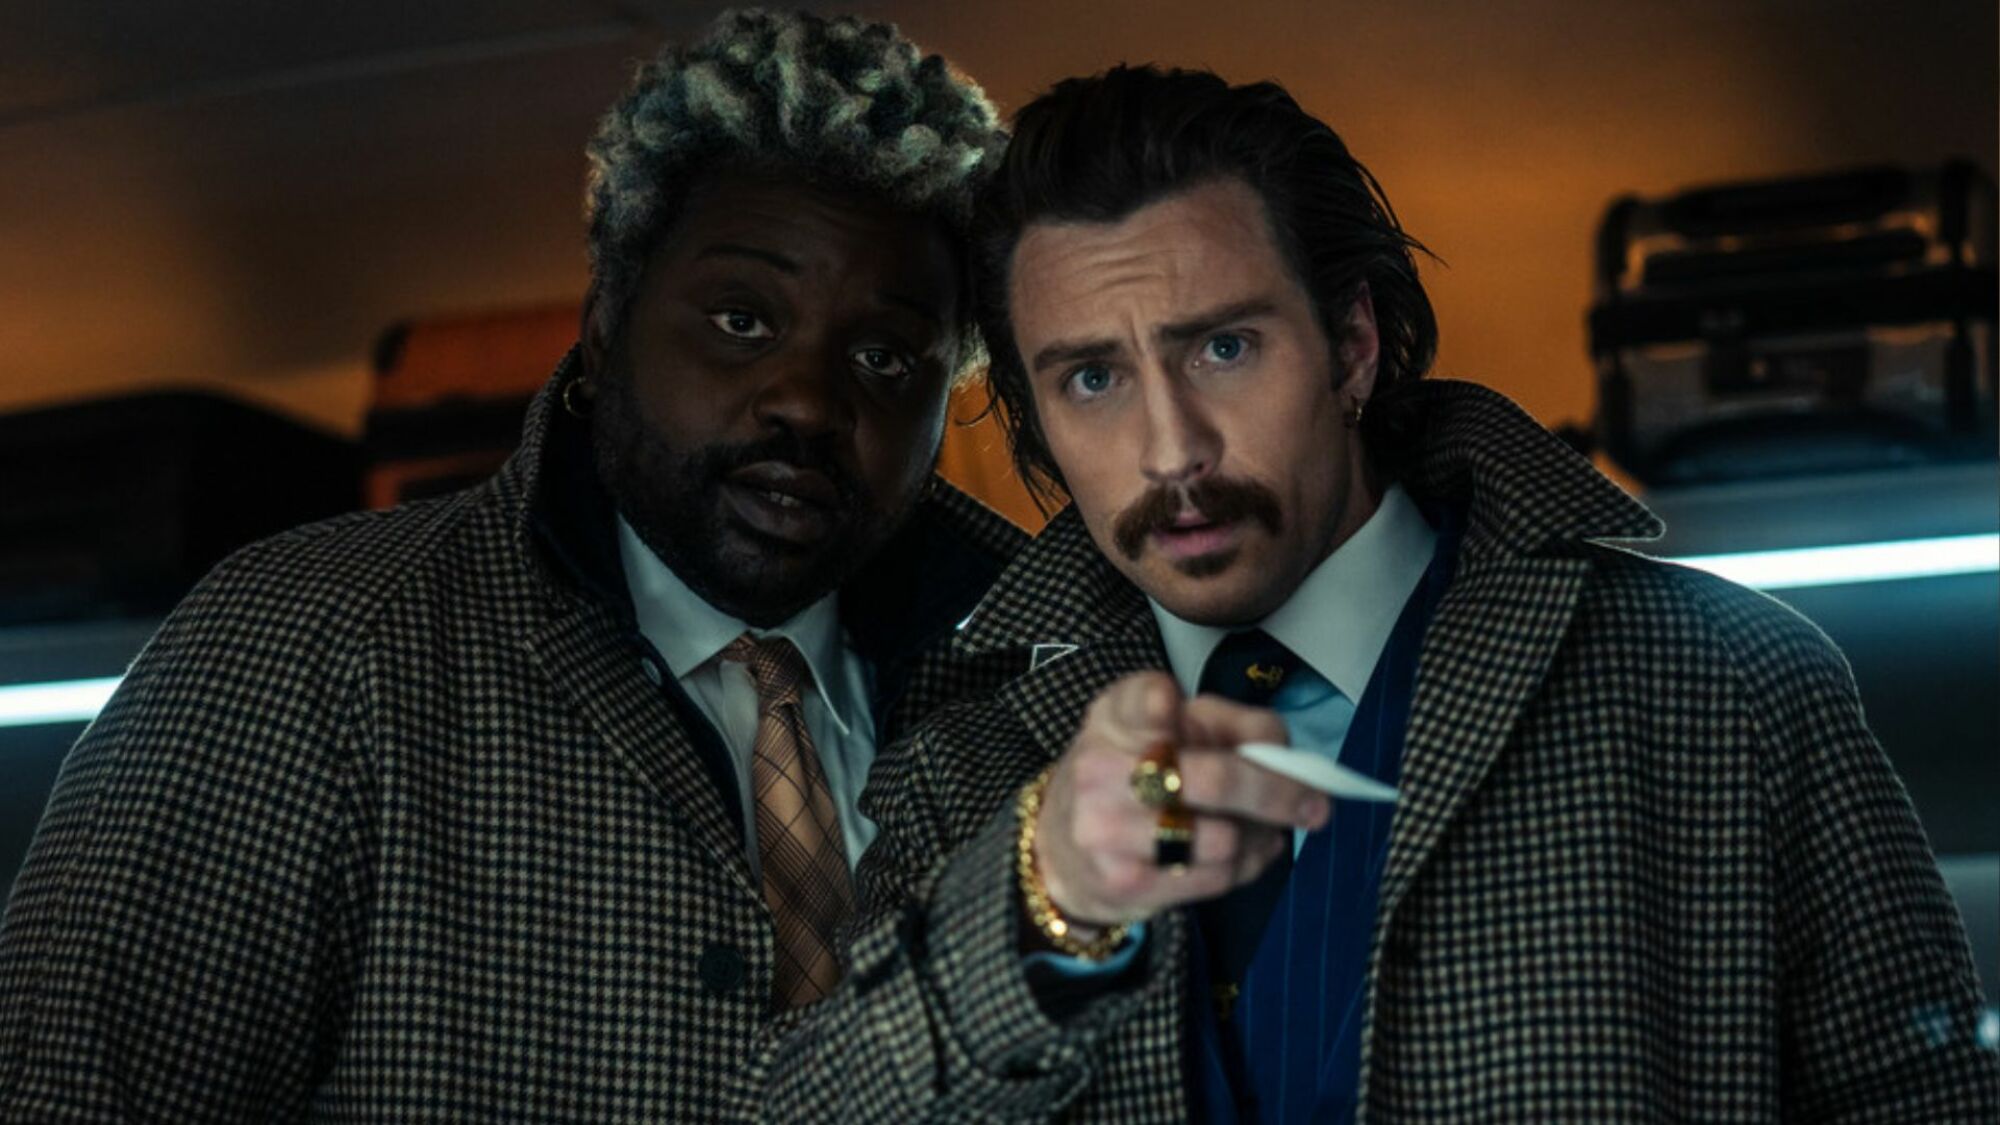 Bryan Tyree Henry and Aaron Taylor-Johnson star in "Bullet Train."